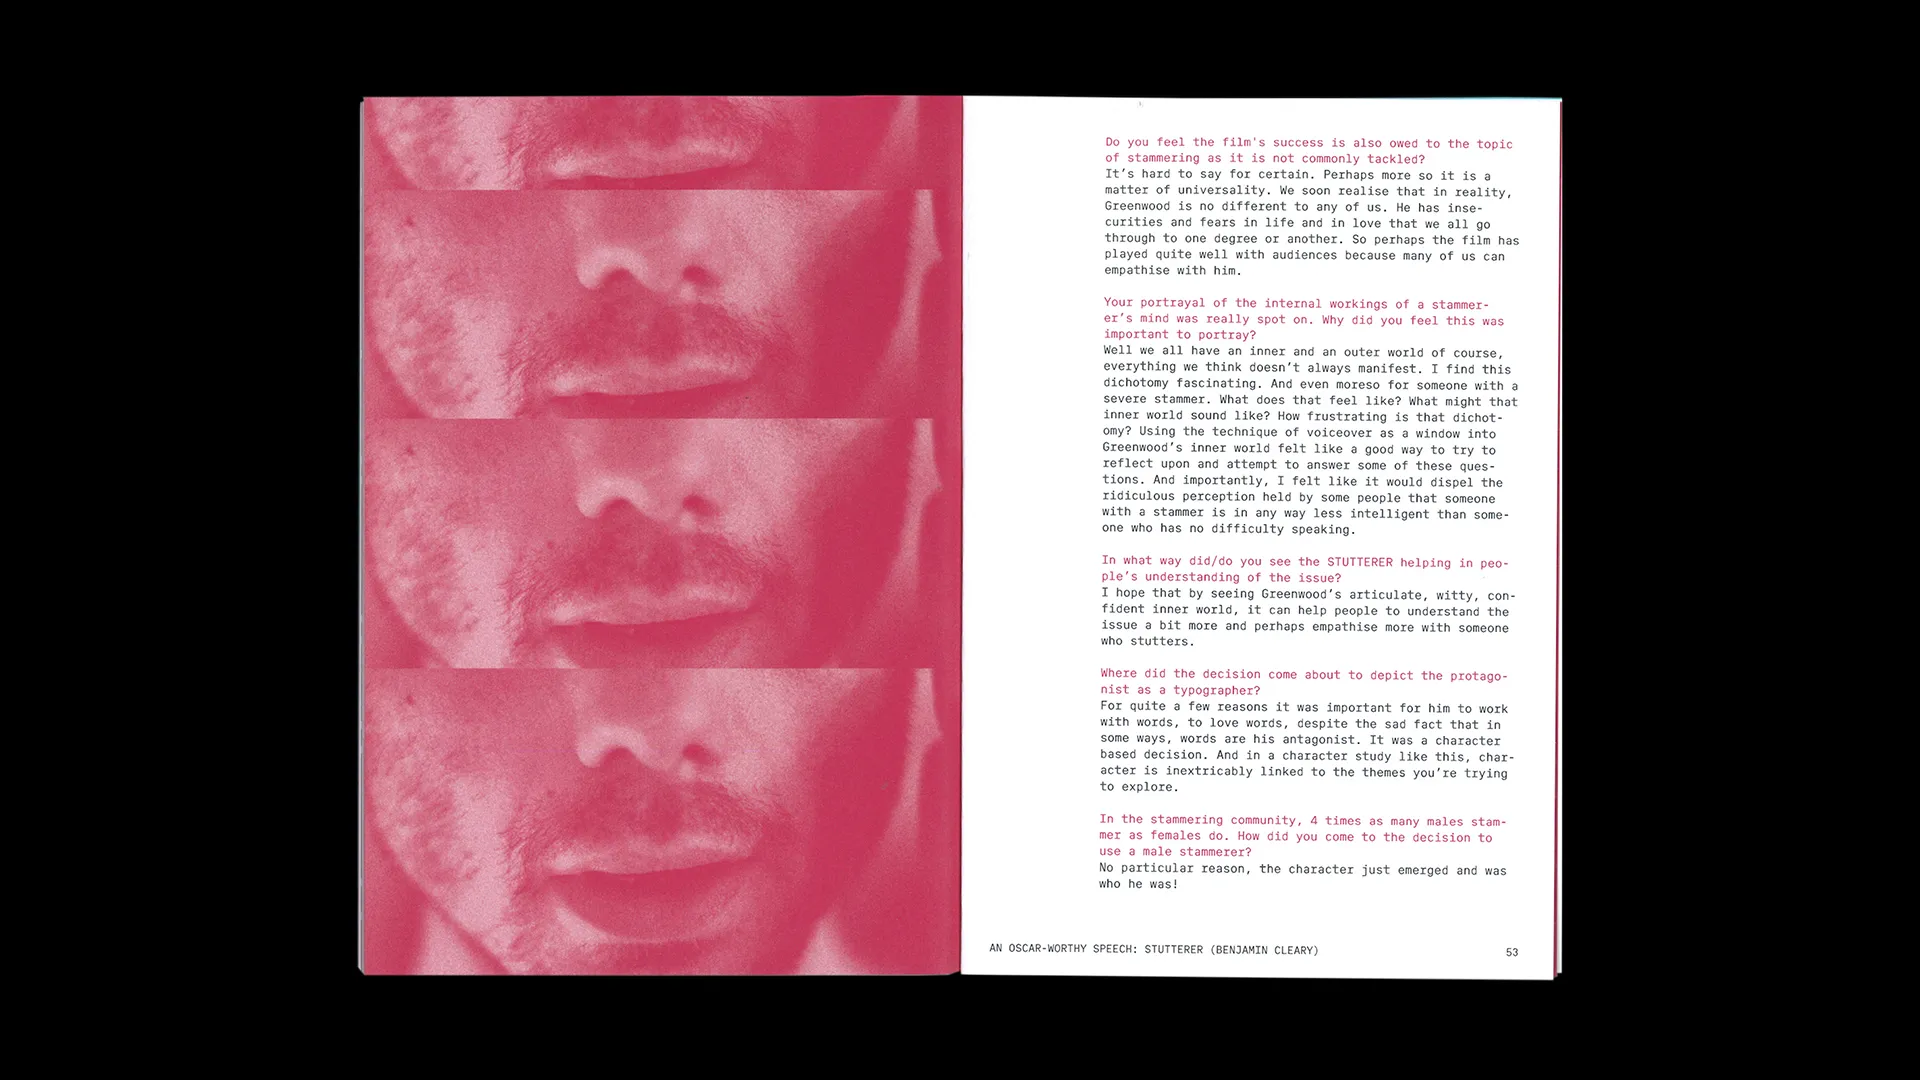 anned image of Dysfluent Issue 1. On the left page is a repeated red image of a man’s mouth. On the right is a text interview with Benjamin Cleary, director of short film Stutterer.